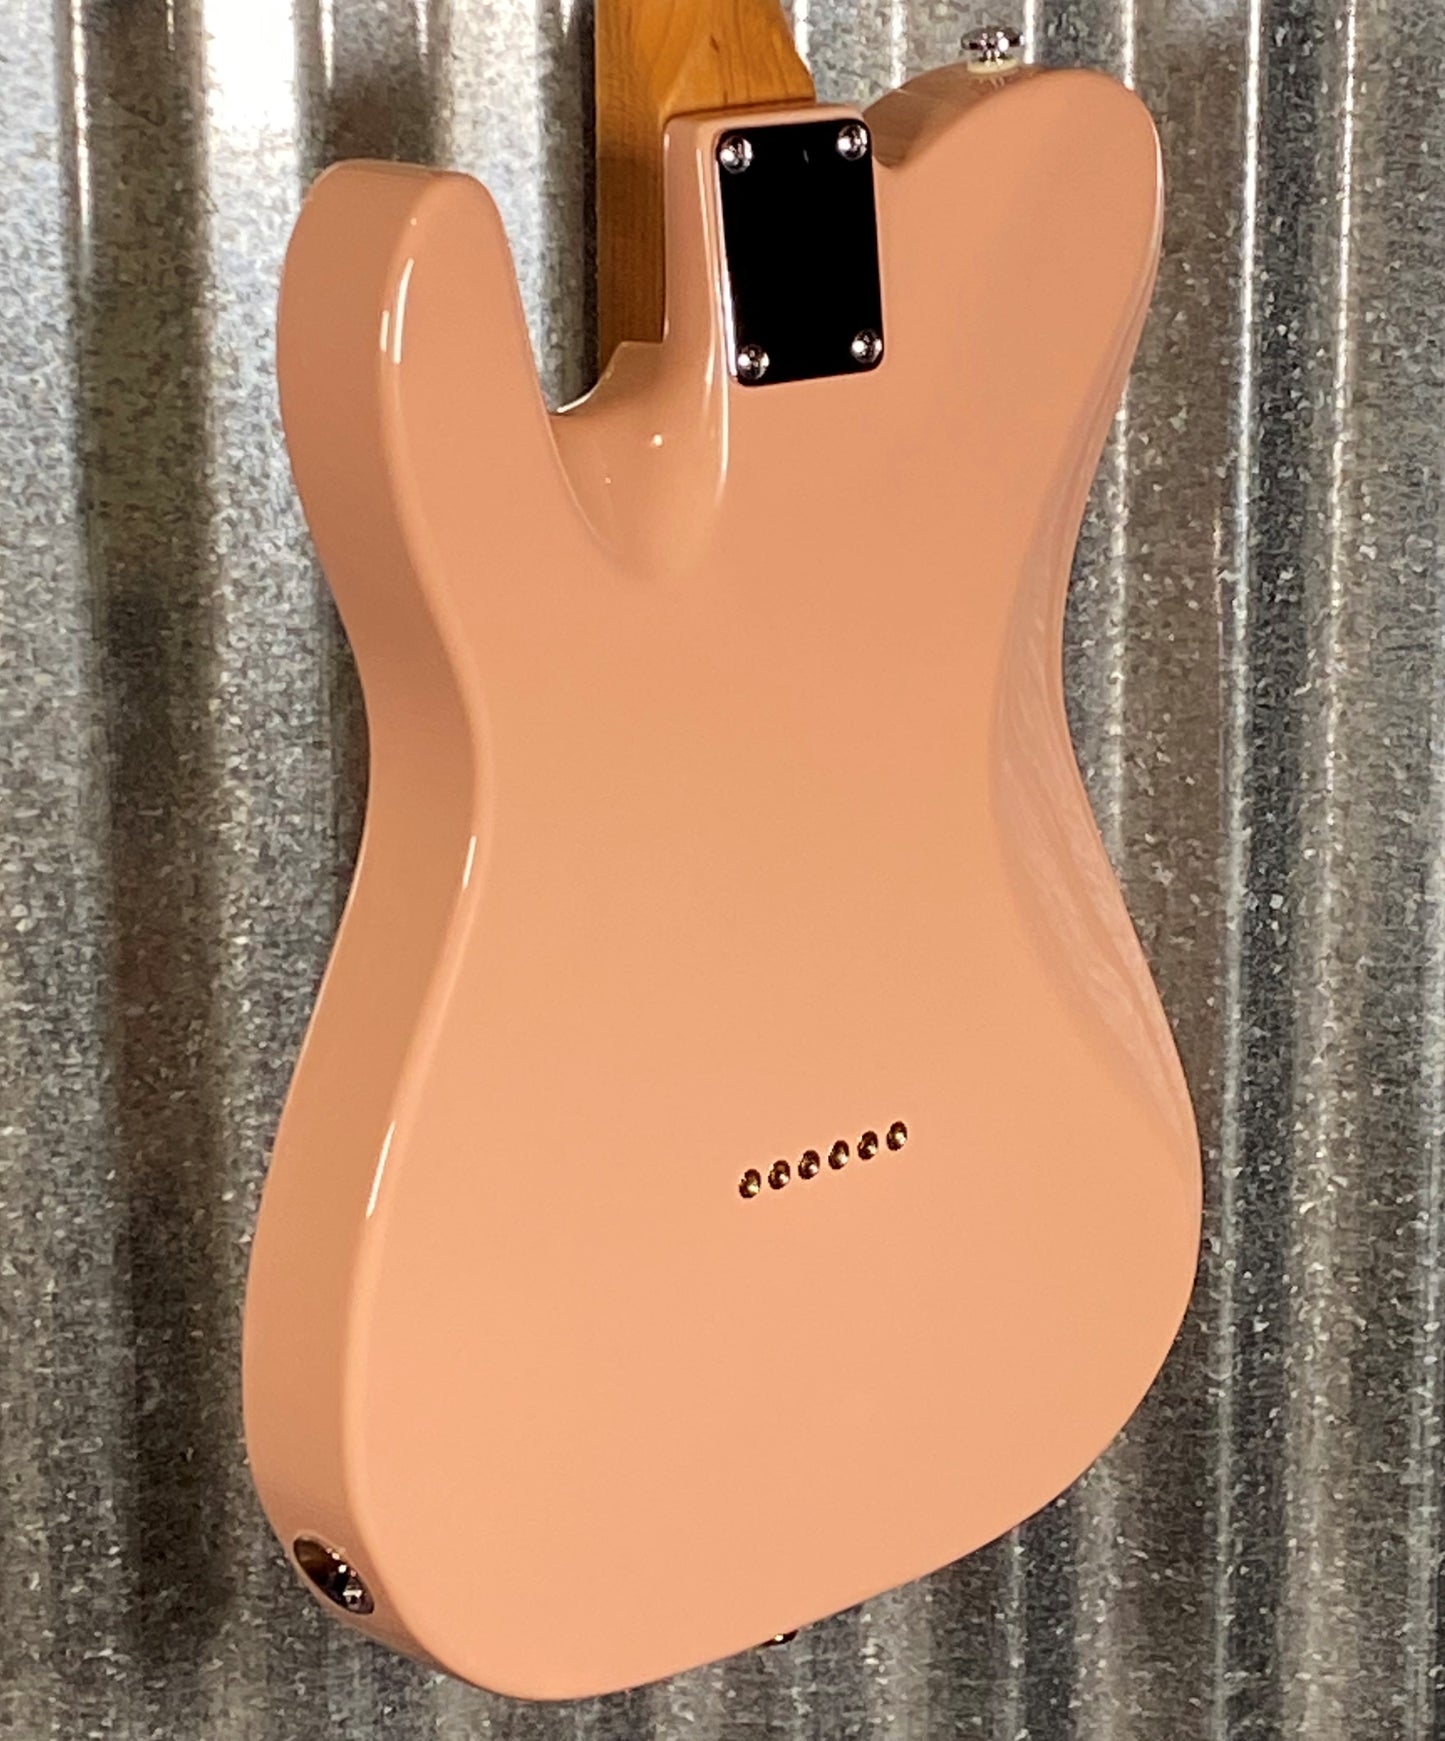 Musi Virgo Classic Telecaster Shell Pink Guitar #0253 Used